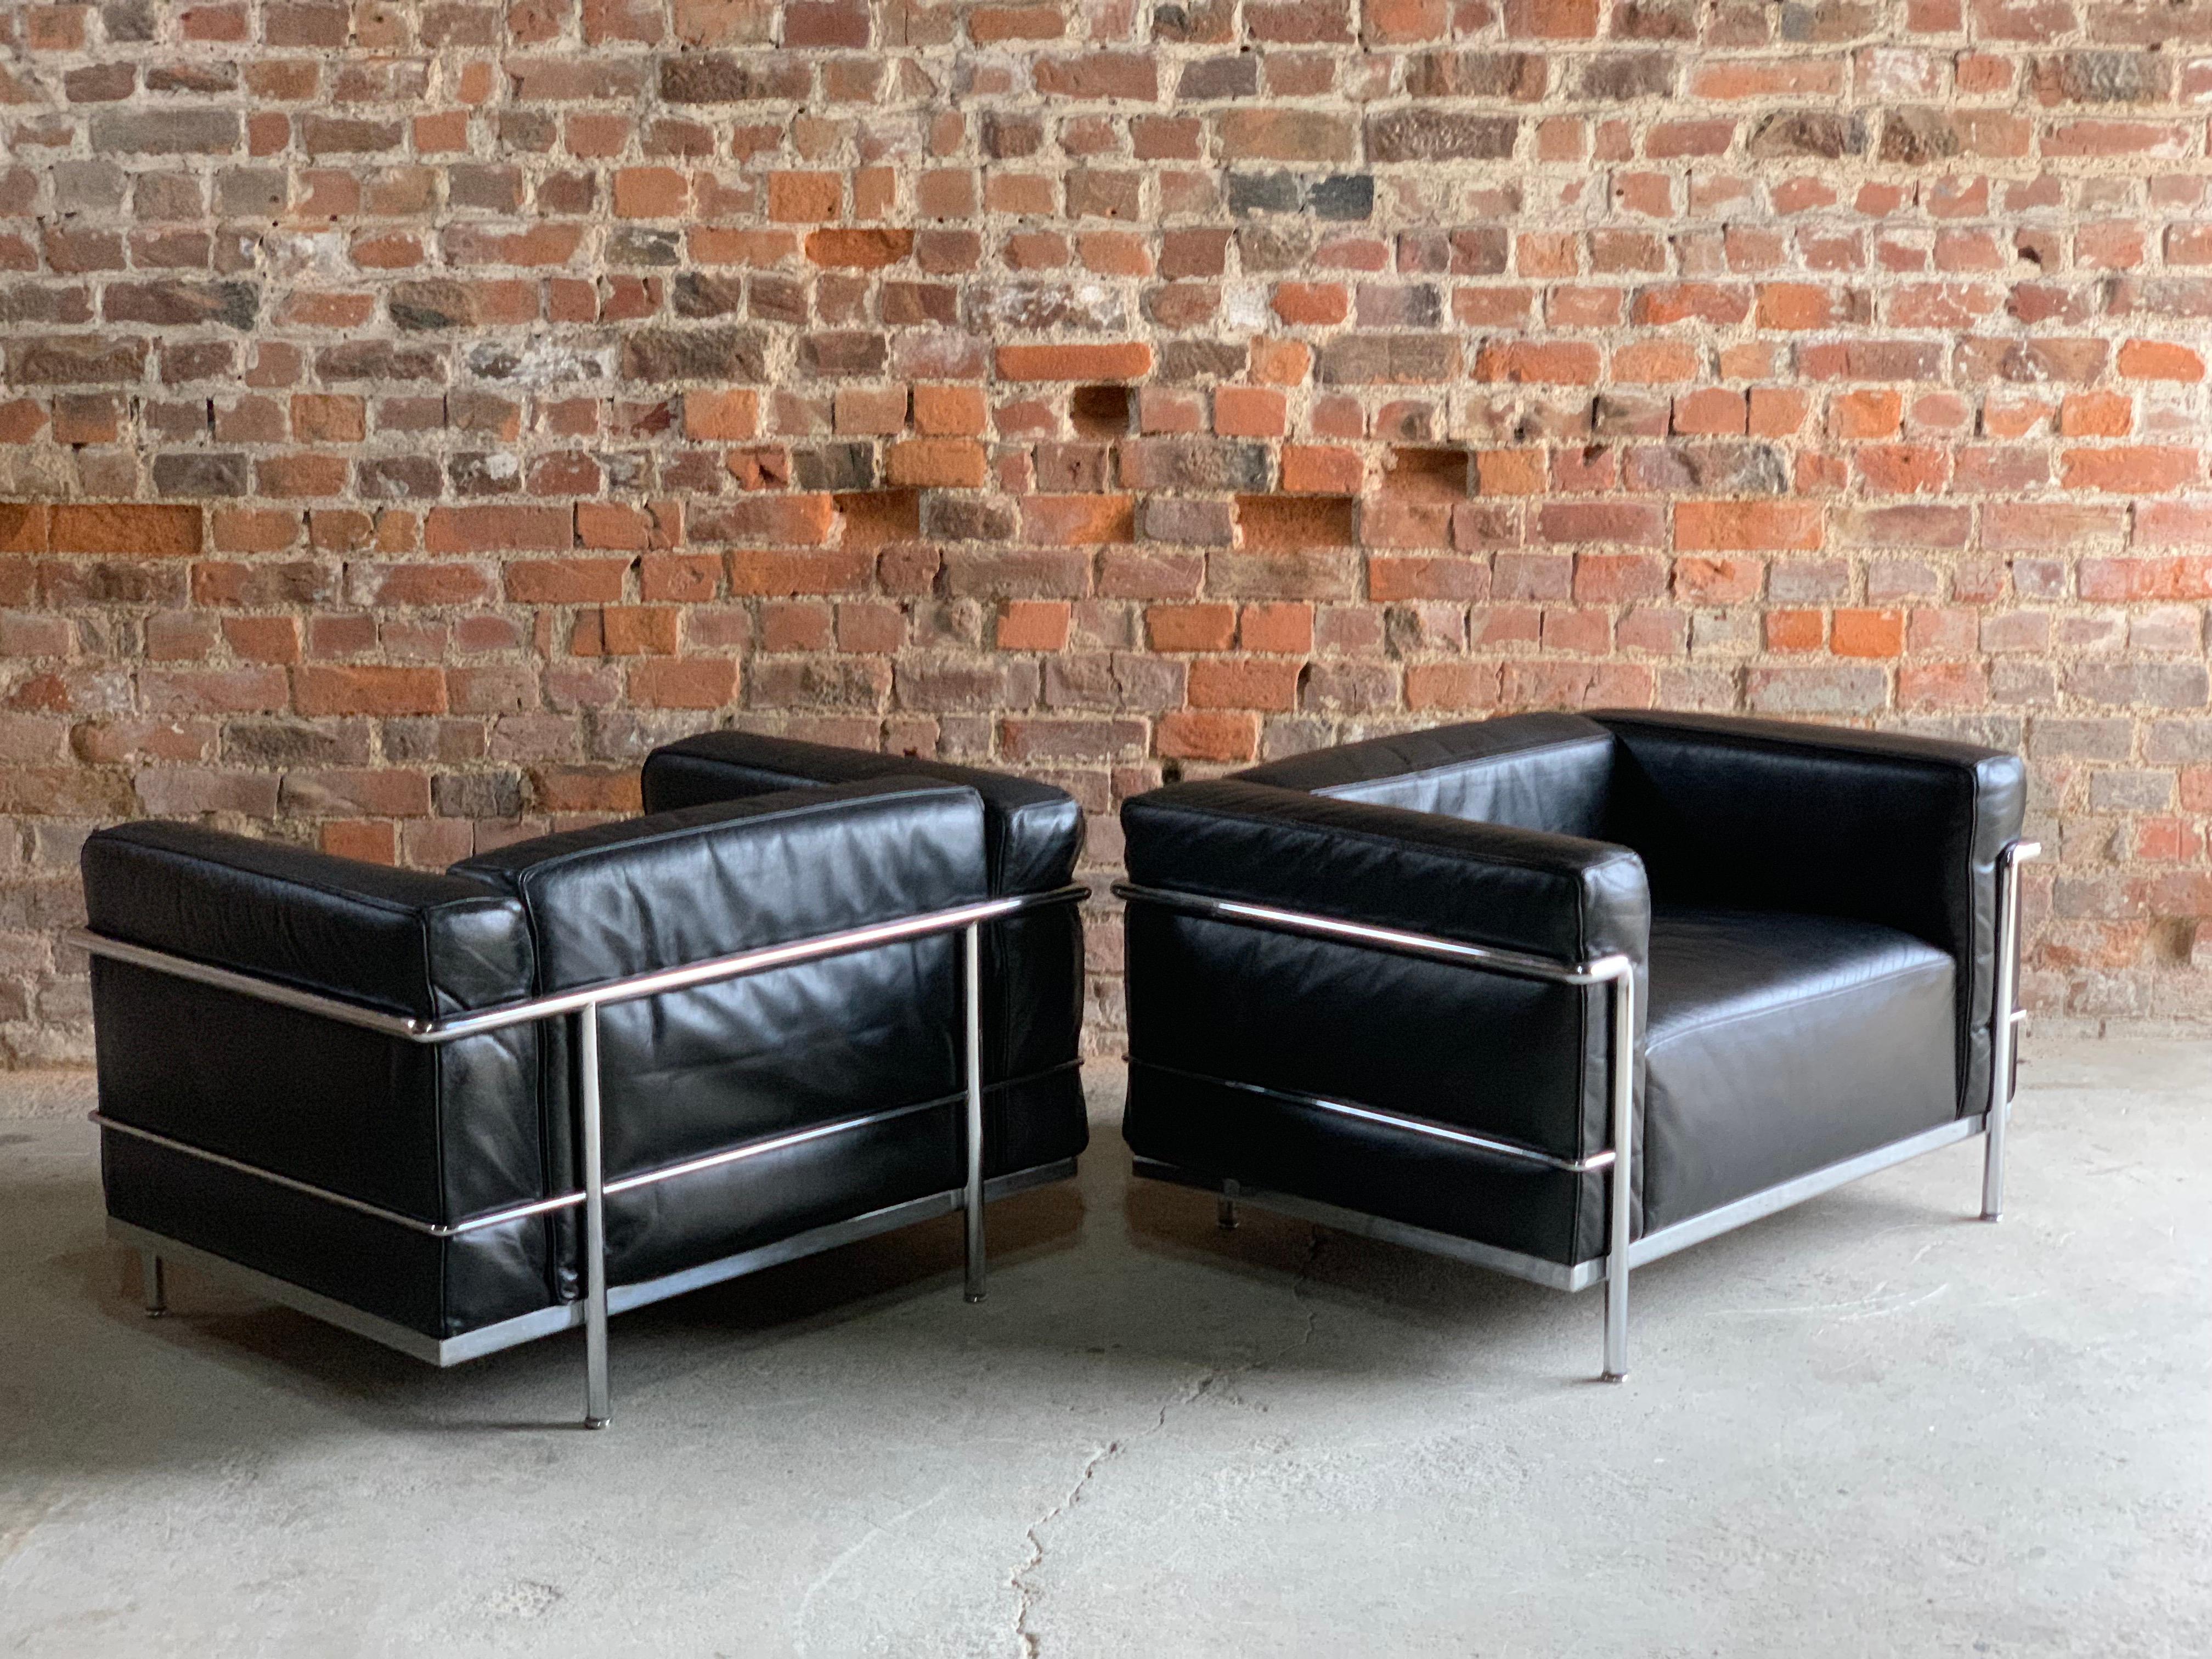 
Le Corbusier LC3 armchairs by Pierre Jeanneret, and Charlotte Perriand by Cassina

Pair of Le Corbusier Poltrona armchairs, black leather & chrome, with serial number to the underside of the arm LC 3 006246, LC 3 006200, both stamped Cassina circa